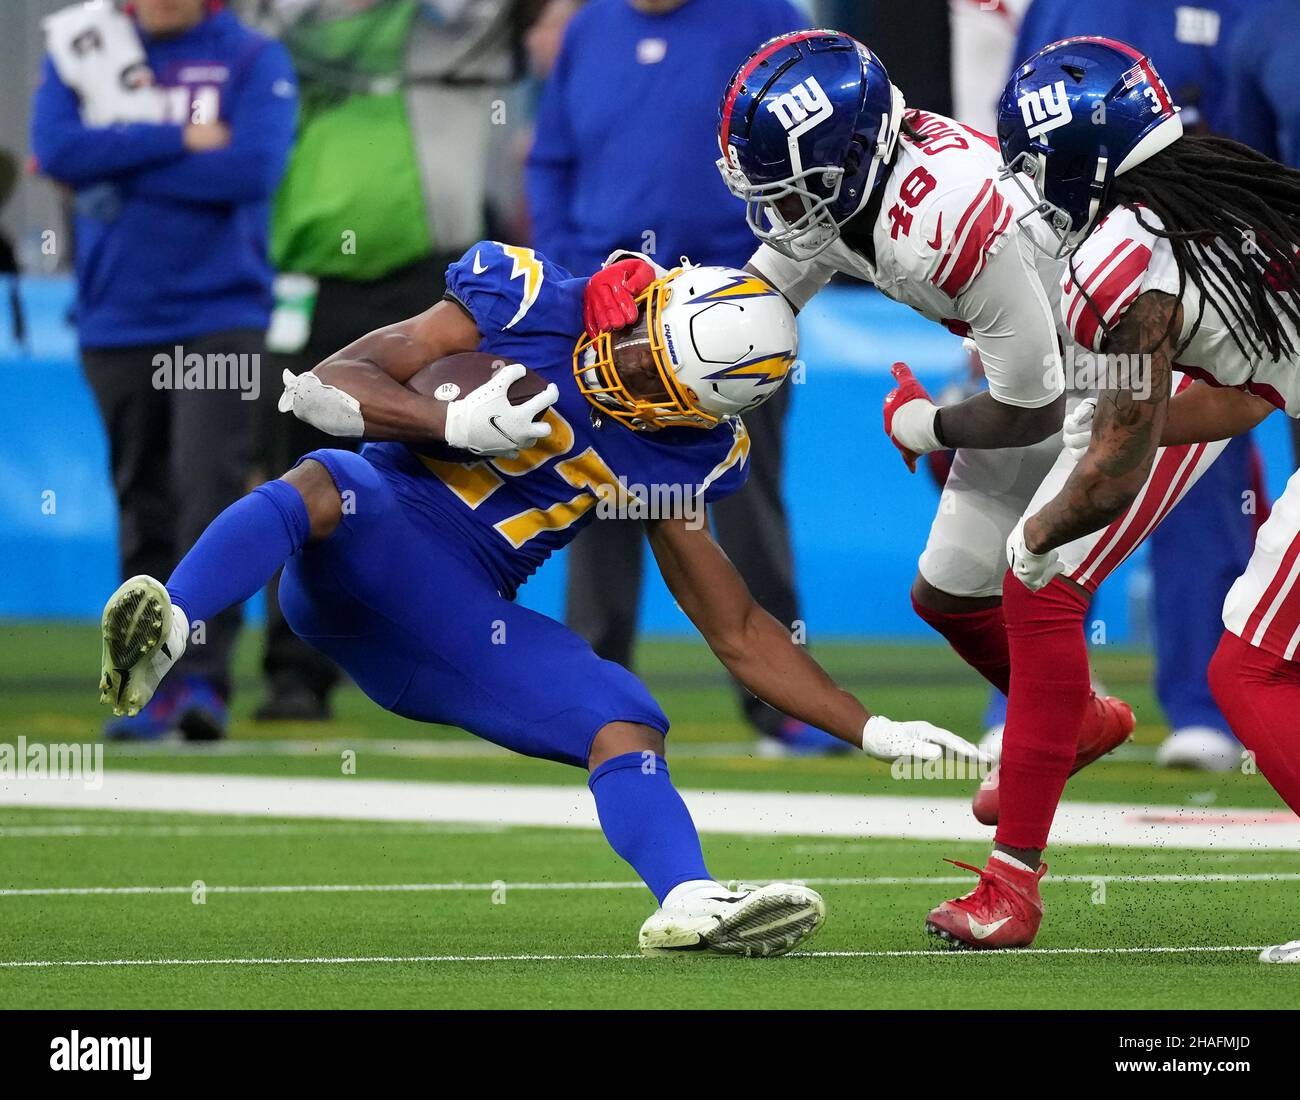 Los Angeles Chargers running back Josh Kelley (27) is tackled by New York Giants linebacker Tae Crowder (48) during third quarter action at SoFi Stadium on Sunday, December 12, 2021 in Inglewood, California. The Chargers defeated the Giants 37-21. Photo by Jon SooHoo/UPI Stock Photo